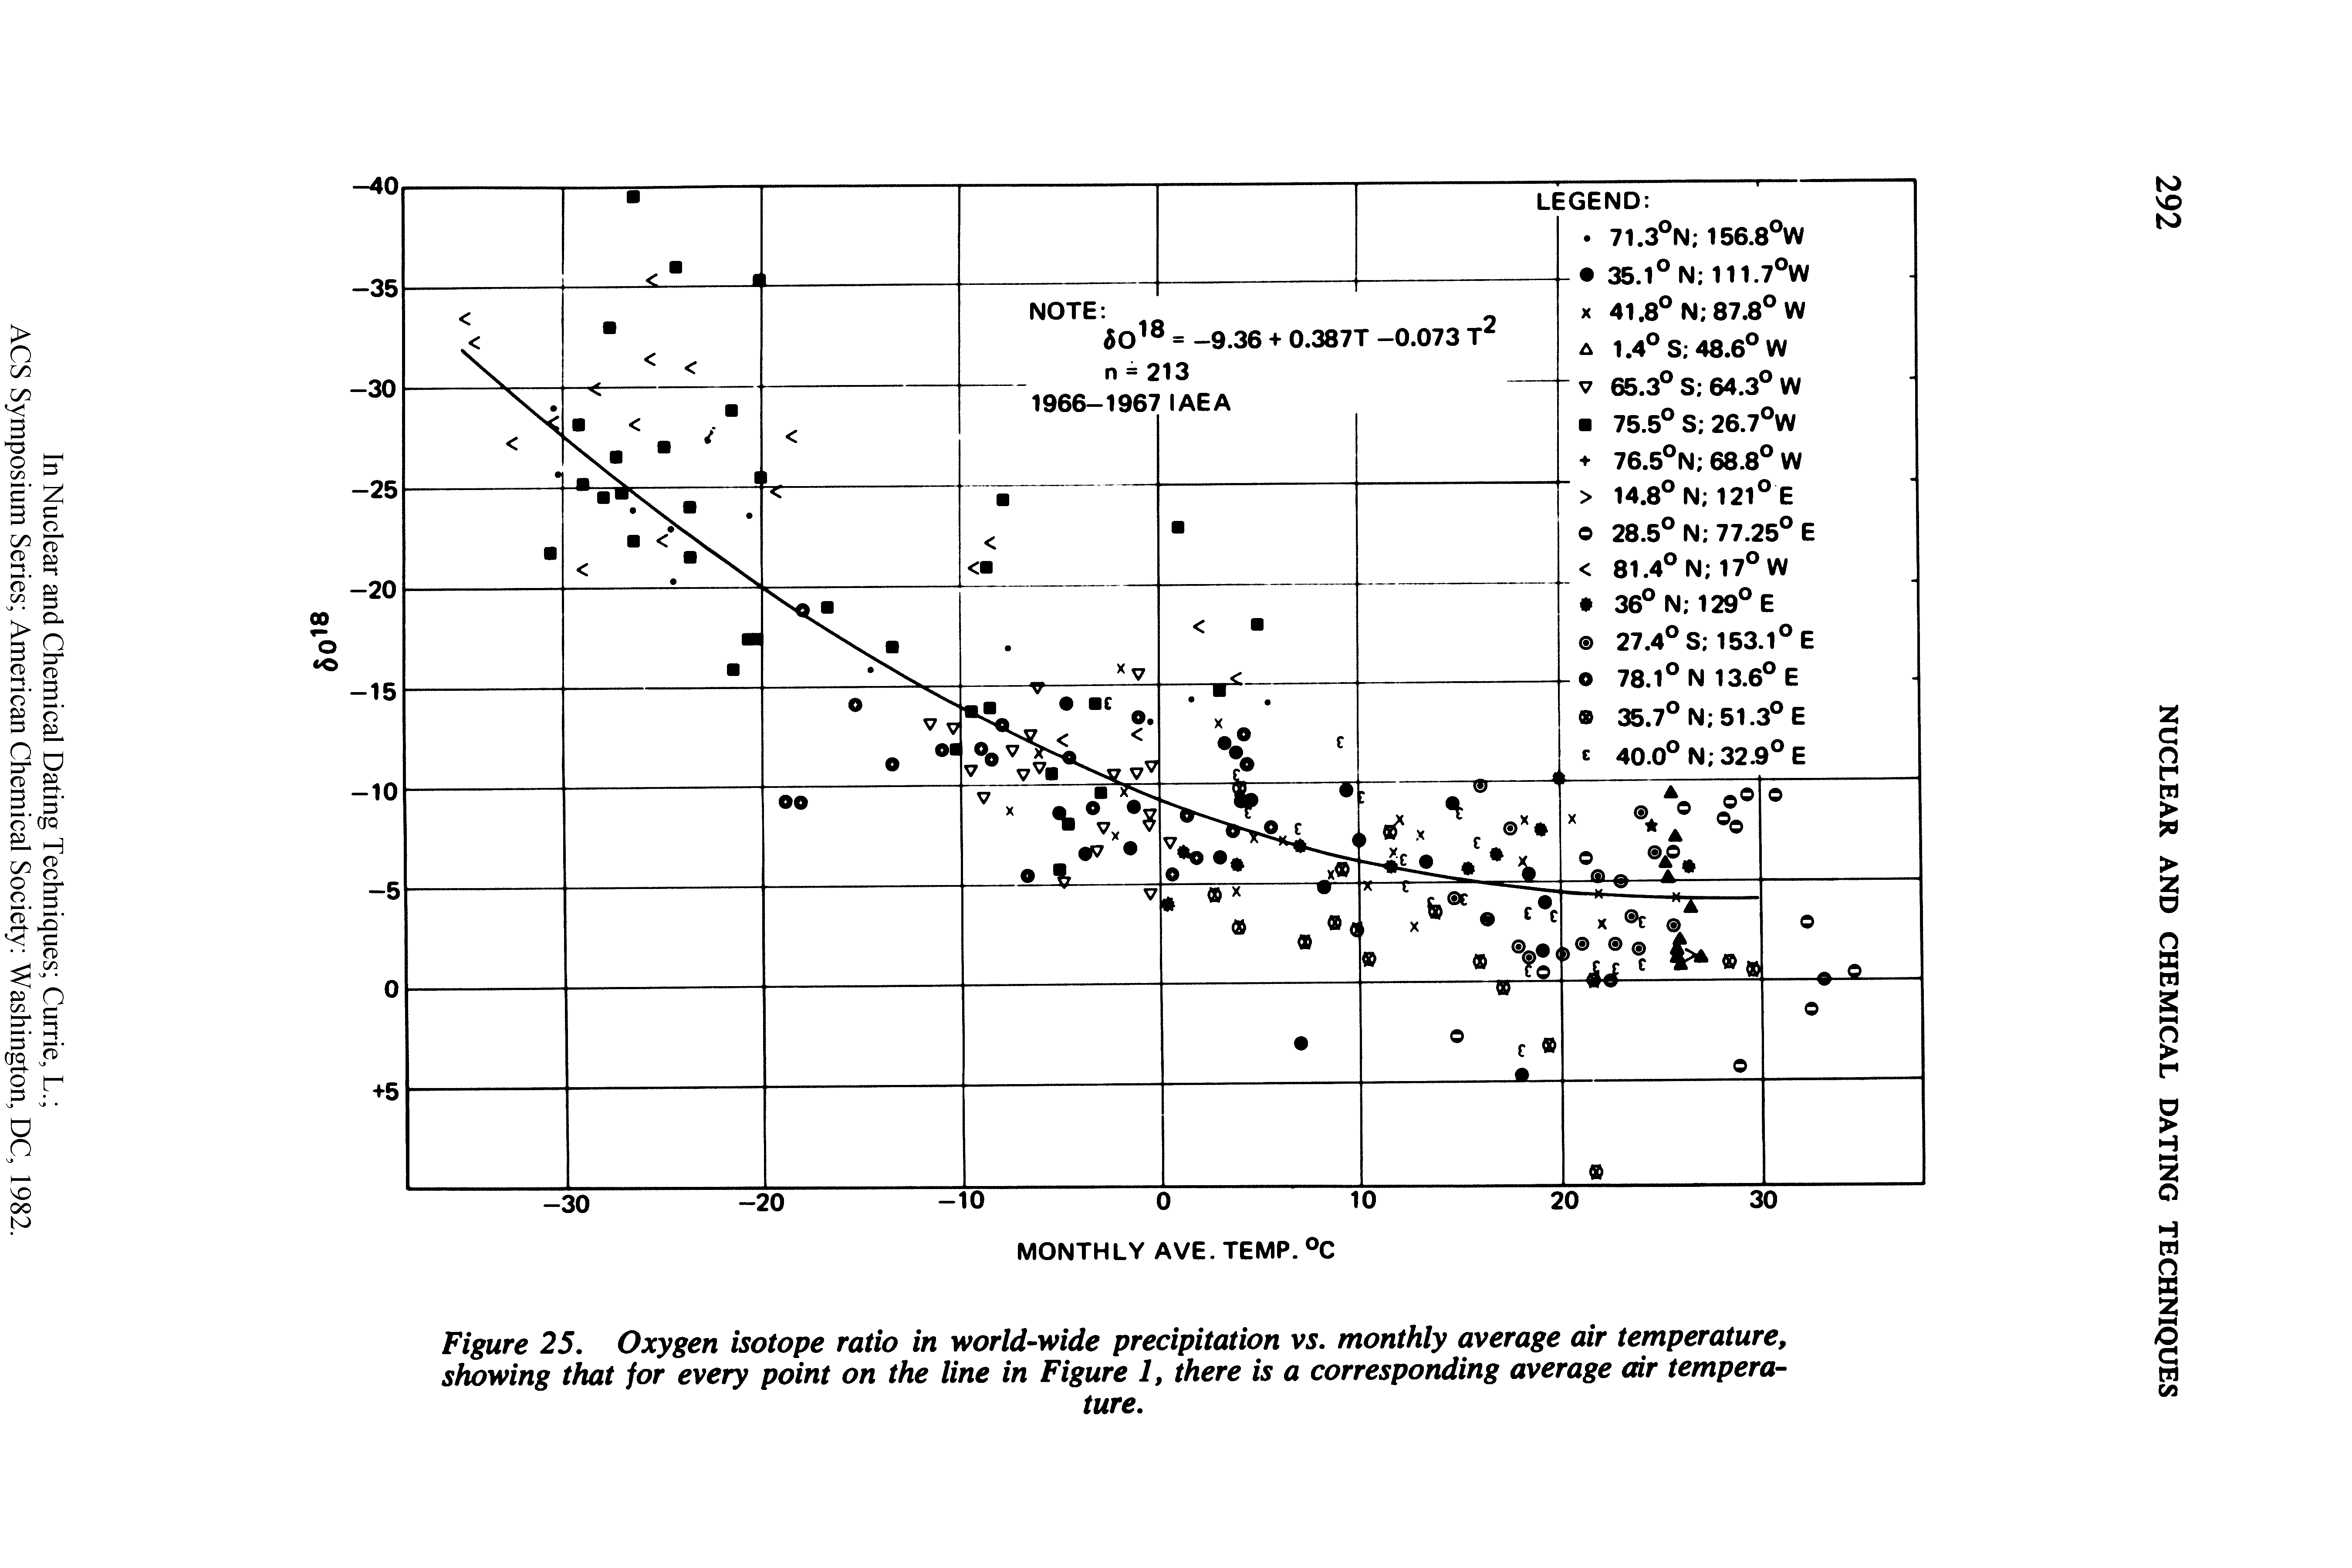 Figure 25. Oxygen isotope ratio in world-wide precipitation vs. monthly average air temperature, showing that for every point on the line in Figure 1, there is a corresponding average air temperature.